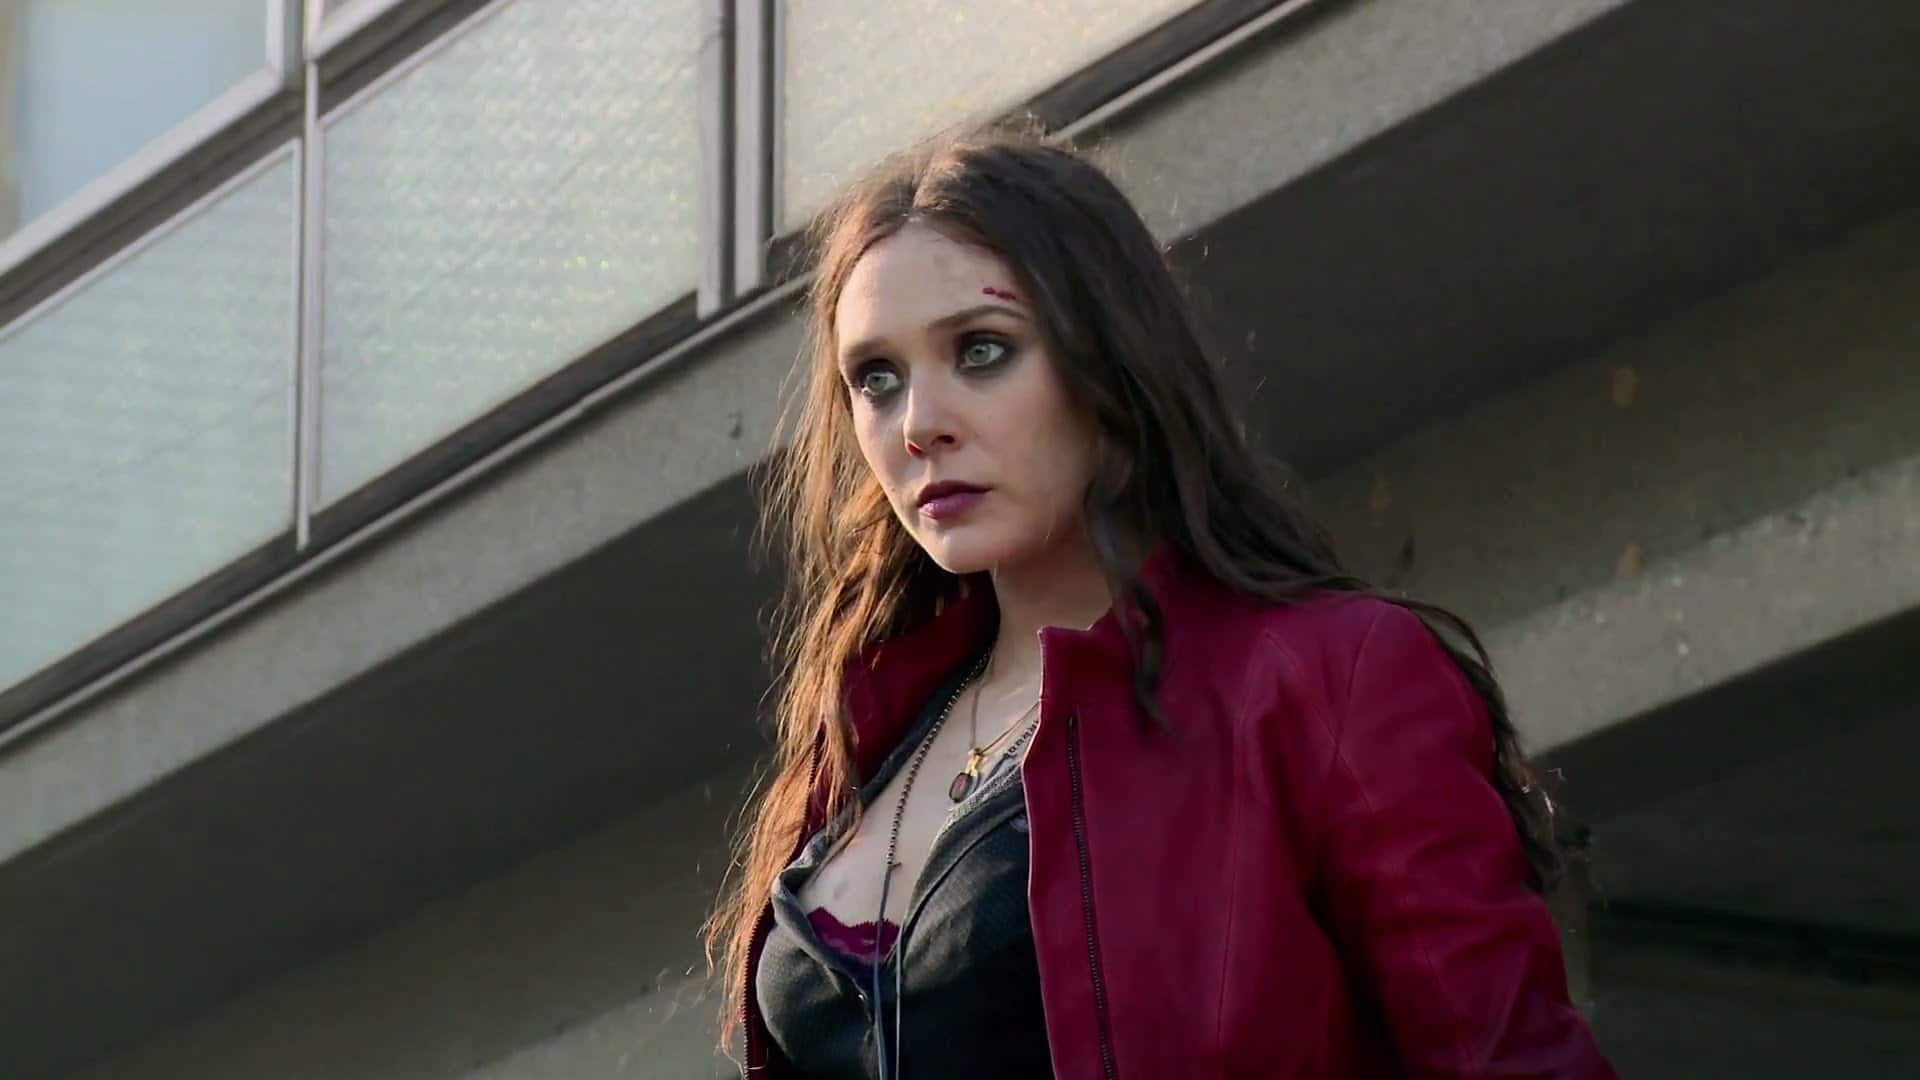 The Scarlet Witch